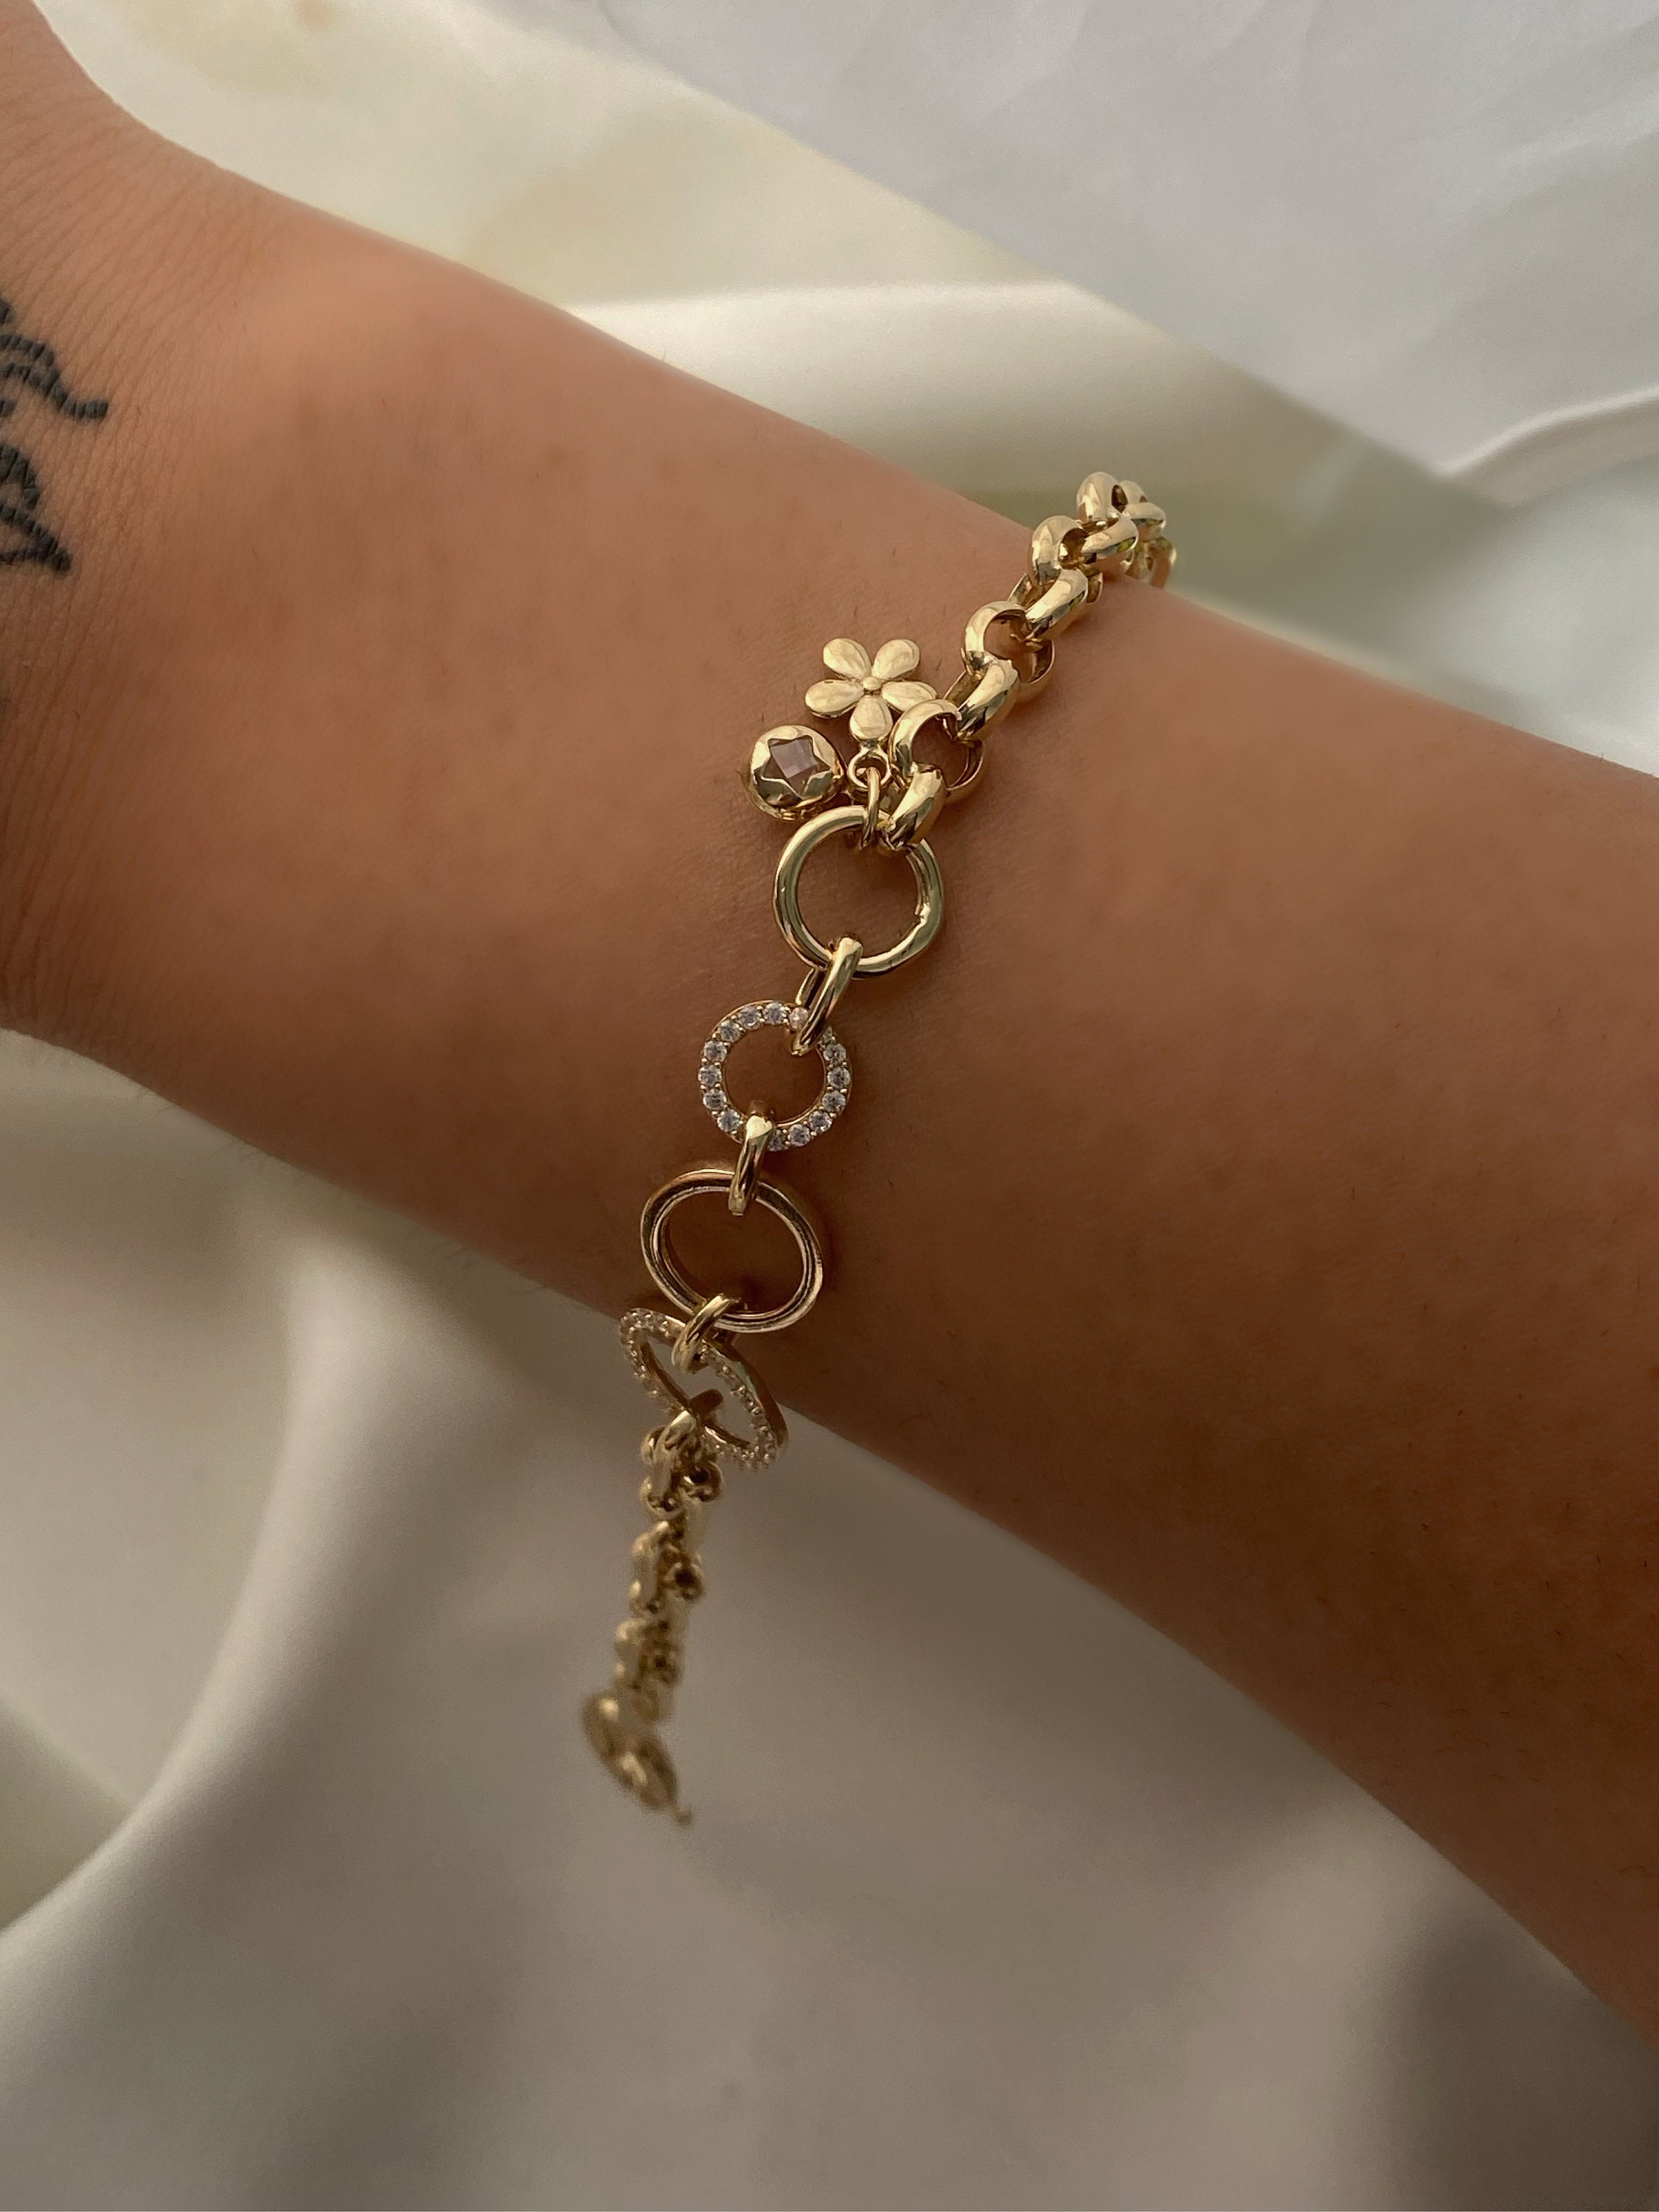 14K Gold Rolo Link & Paperclip Bracelet w/ Star Charm | Double Chain Handmade Dainty Bracelet, Everyday Fine Jewelry, Christmas Gift for Her